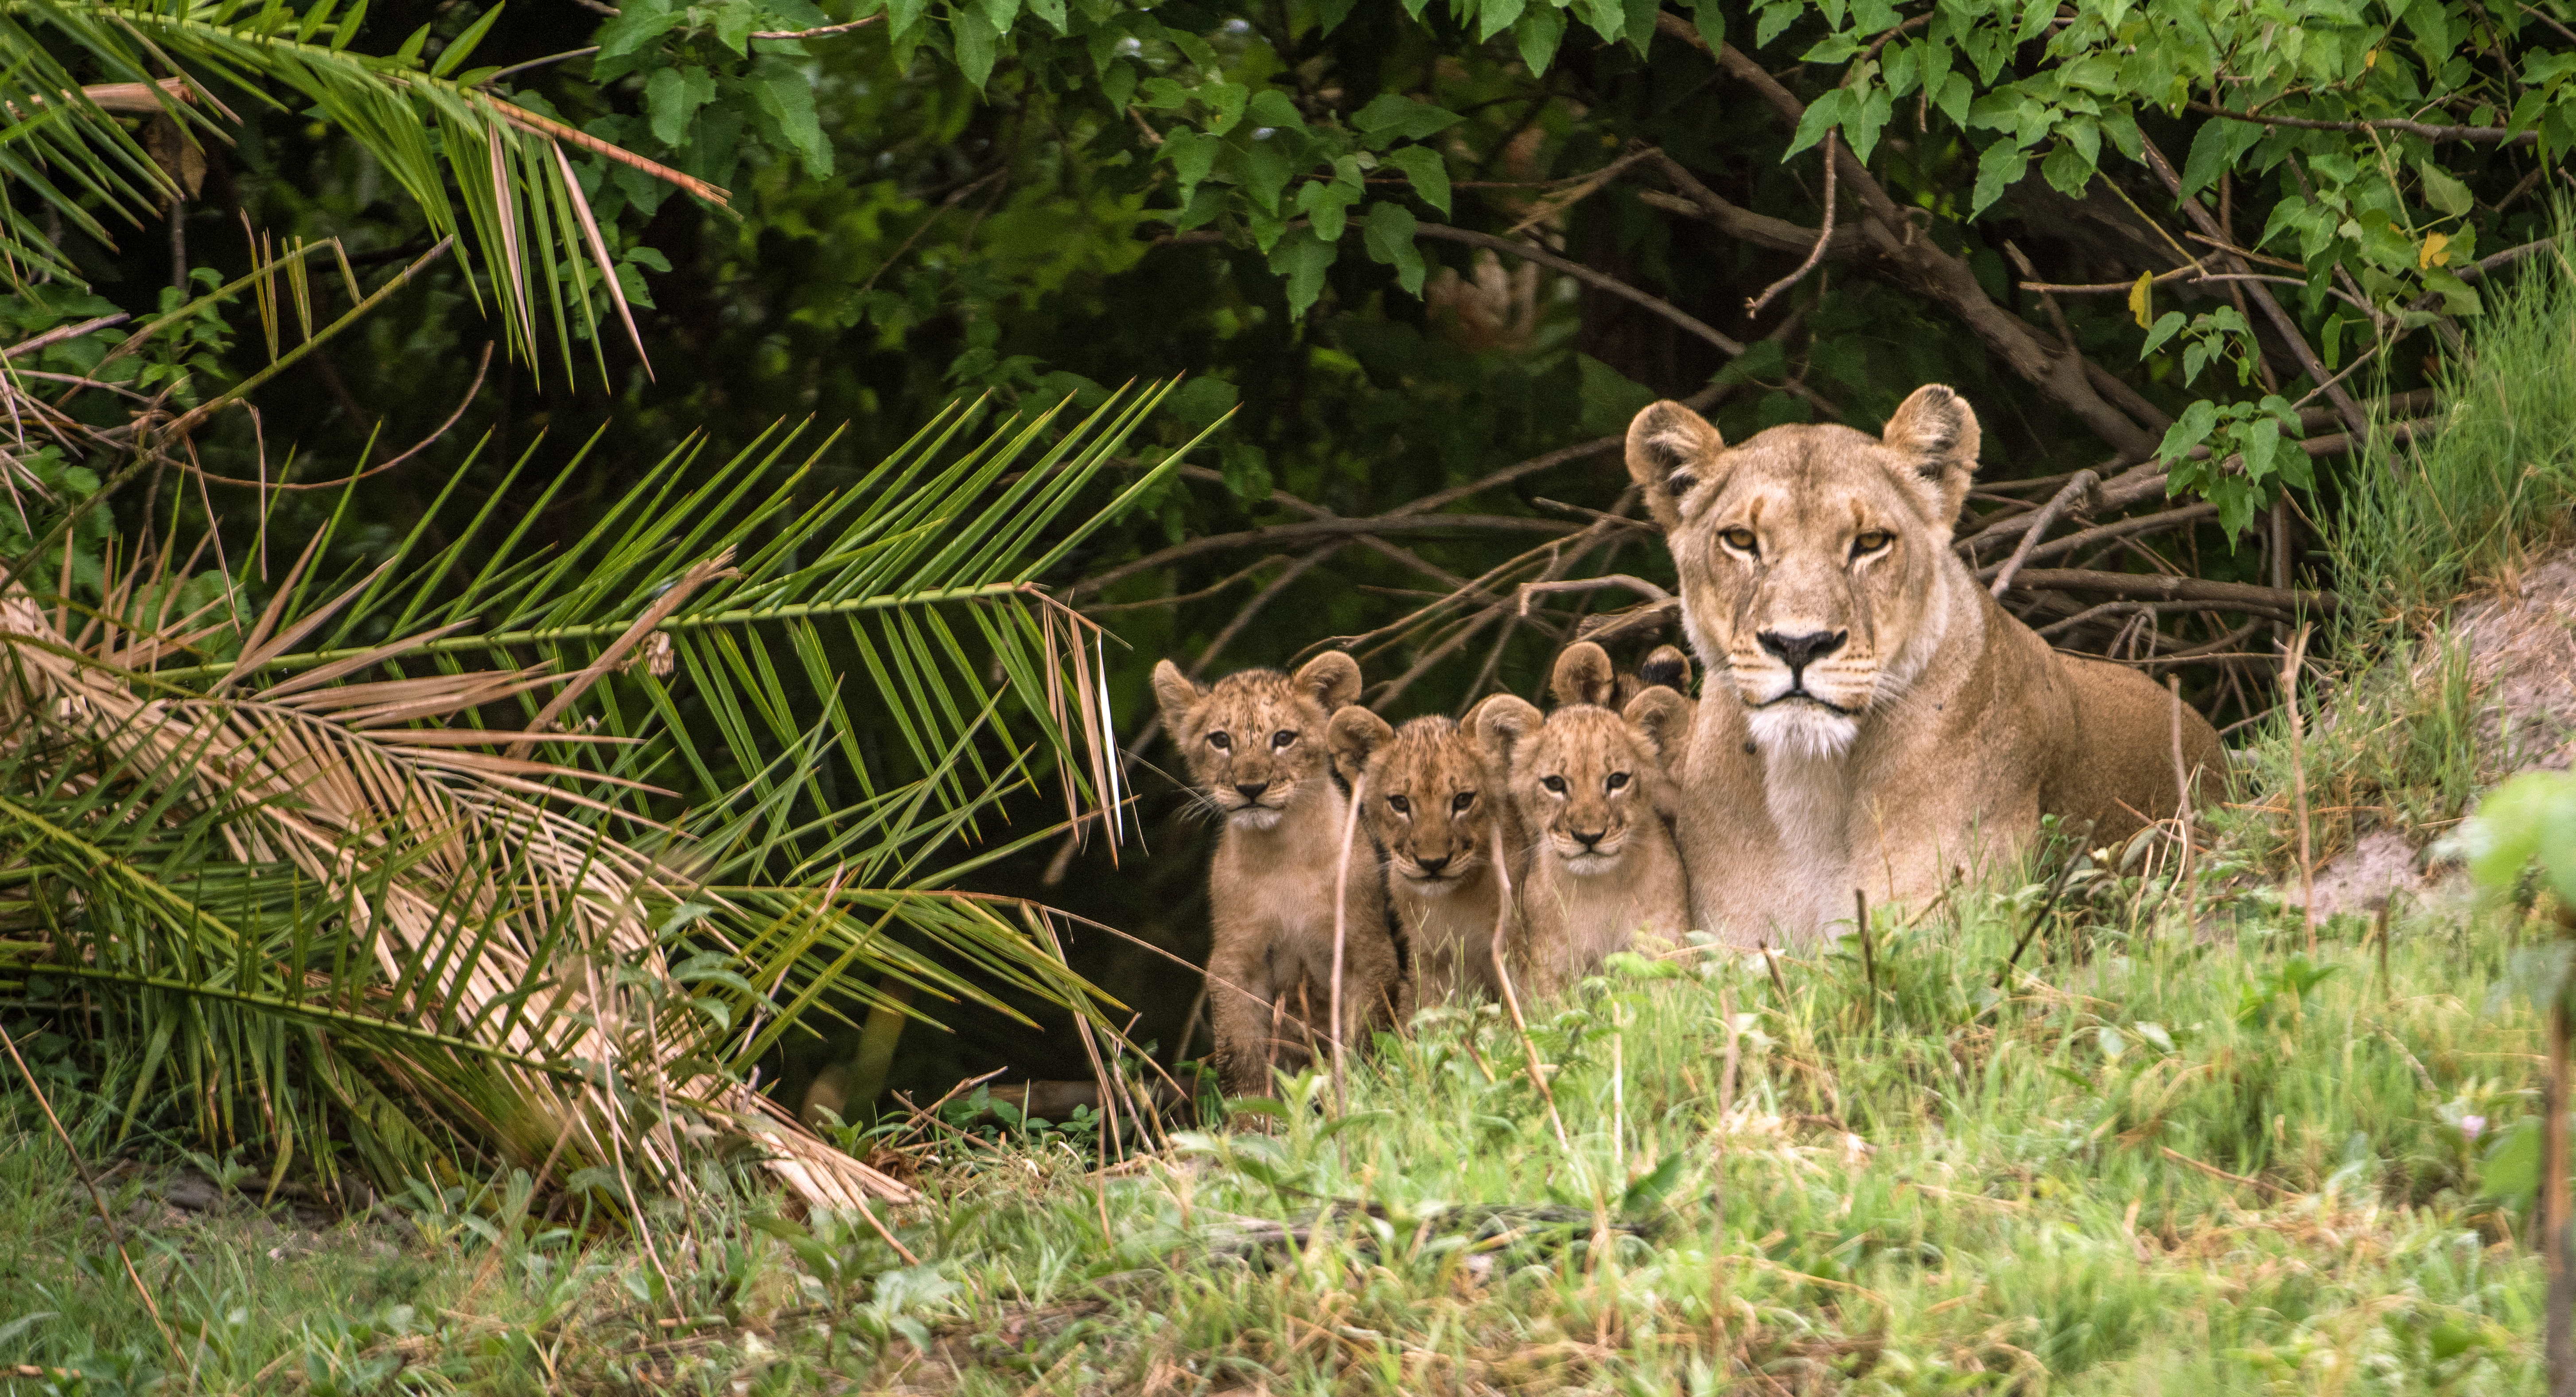 "Mother lion and her cubs within the bushes"